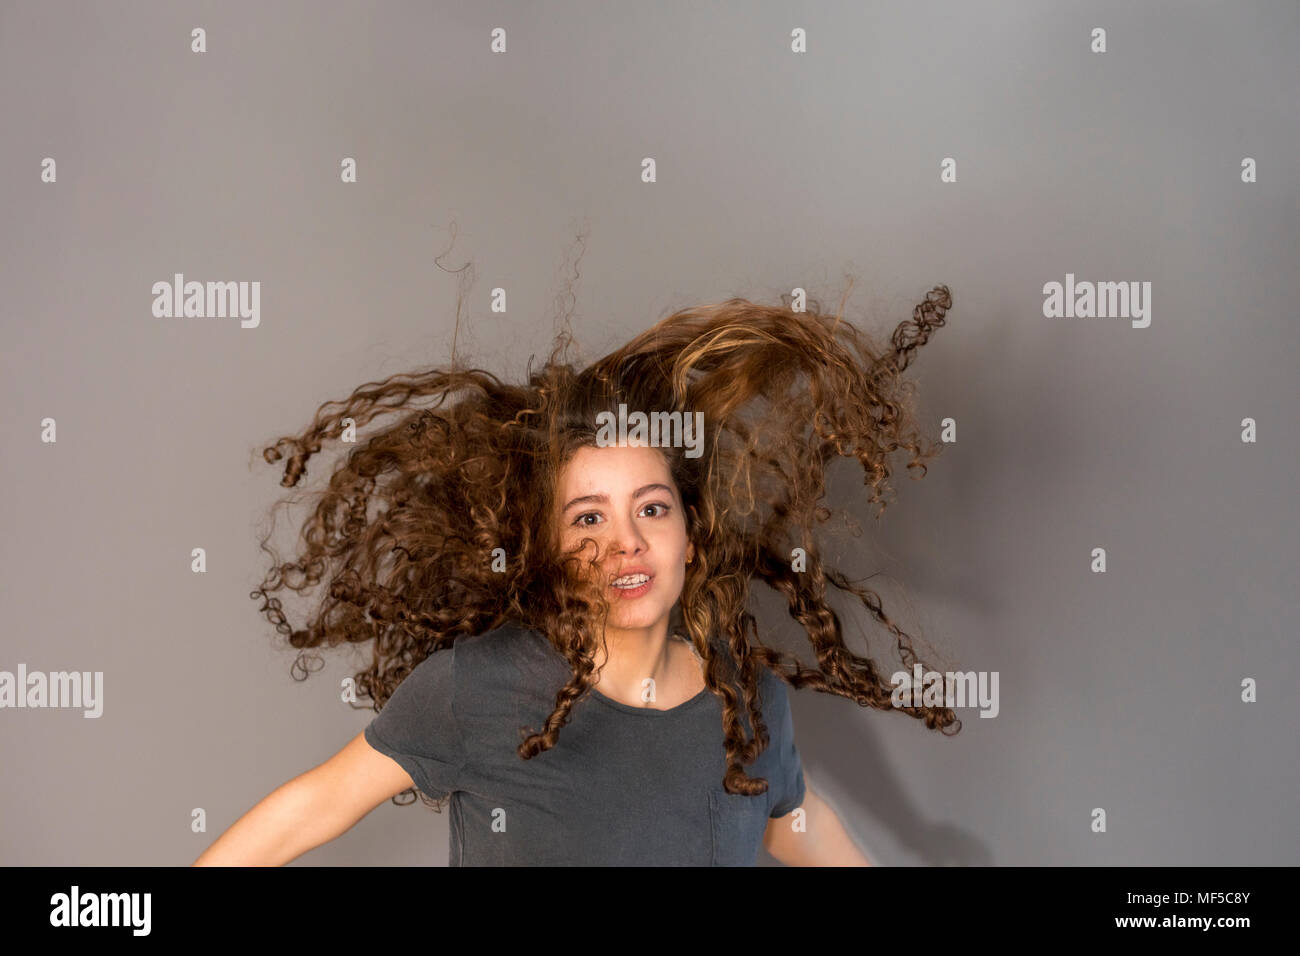 Pretty teenage girl with curly hair, jumping Stock Photo